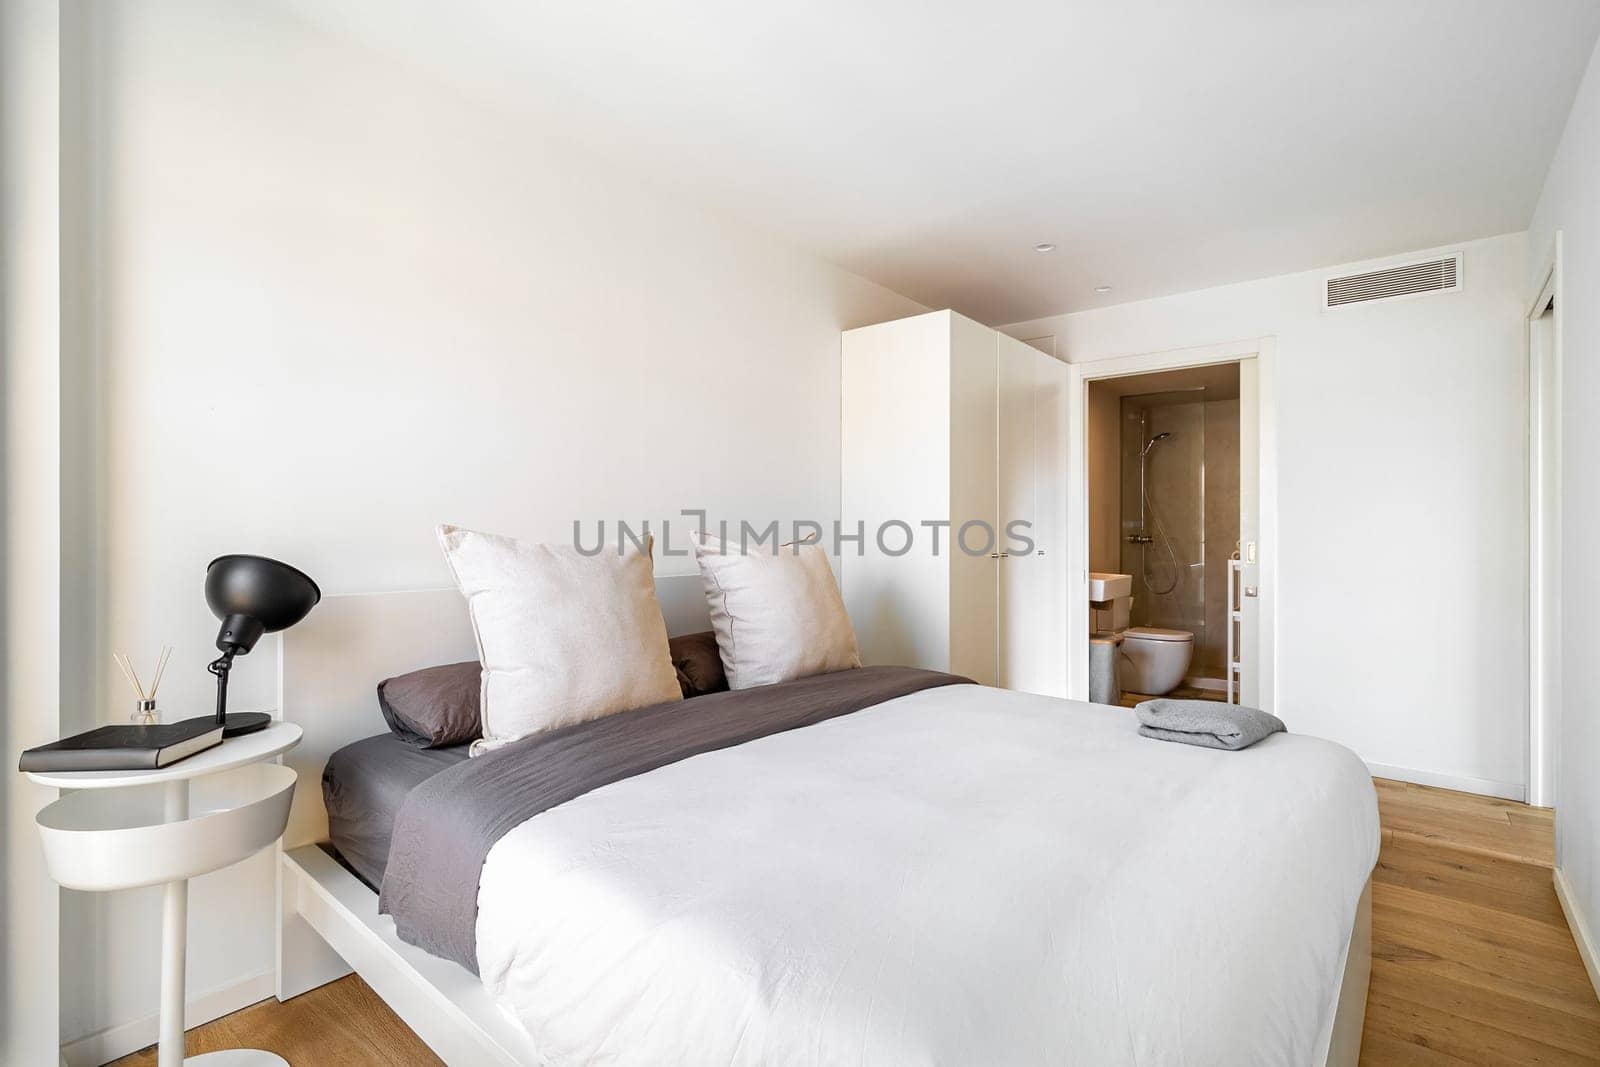 Bright bedroom with cozy bed, big pillows, wardrobe and bathroom. Interior of modern apartment in European city